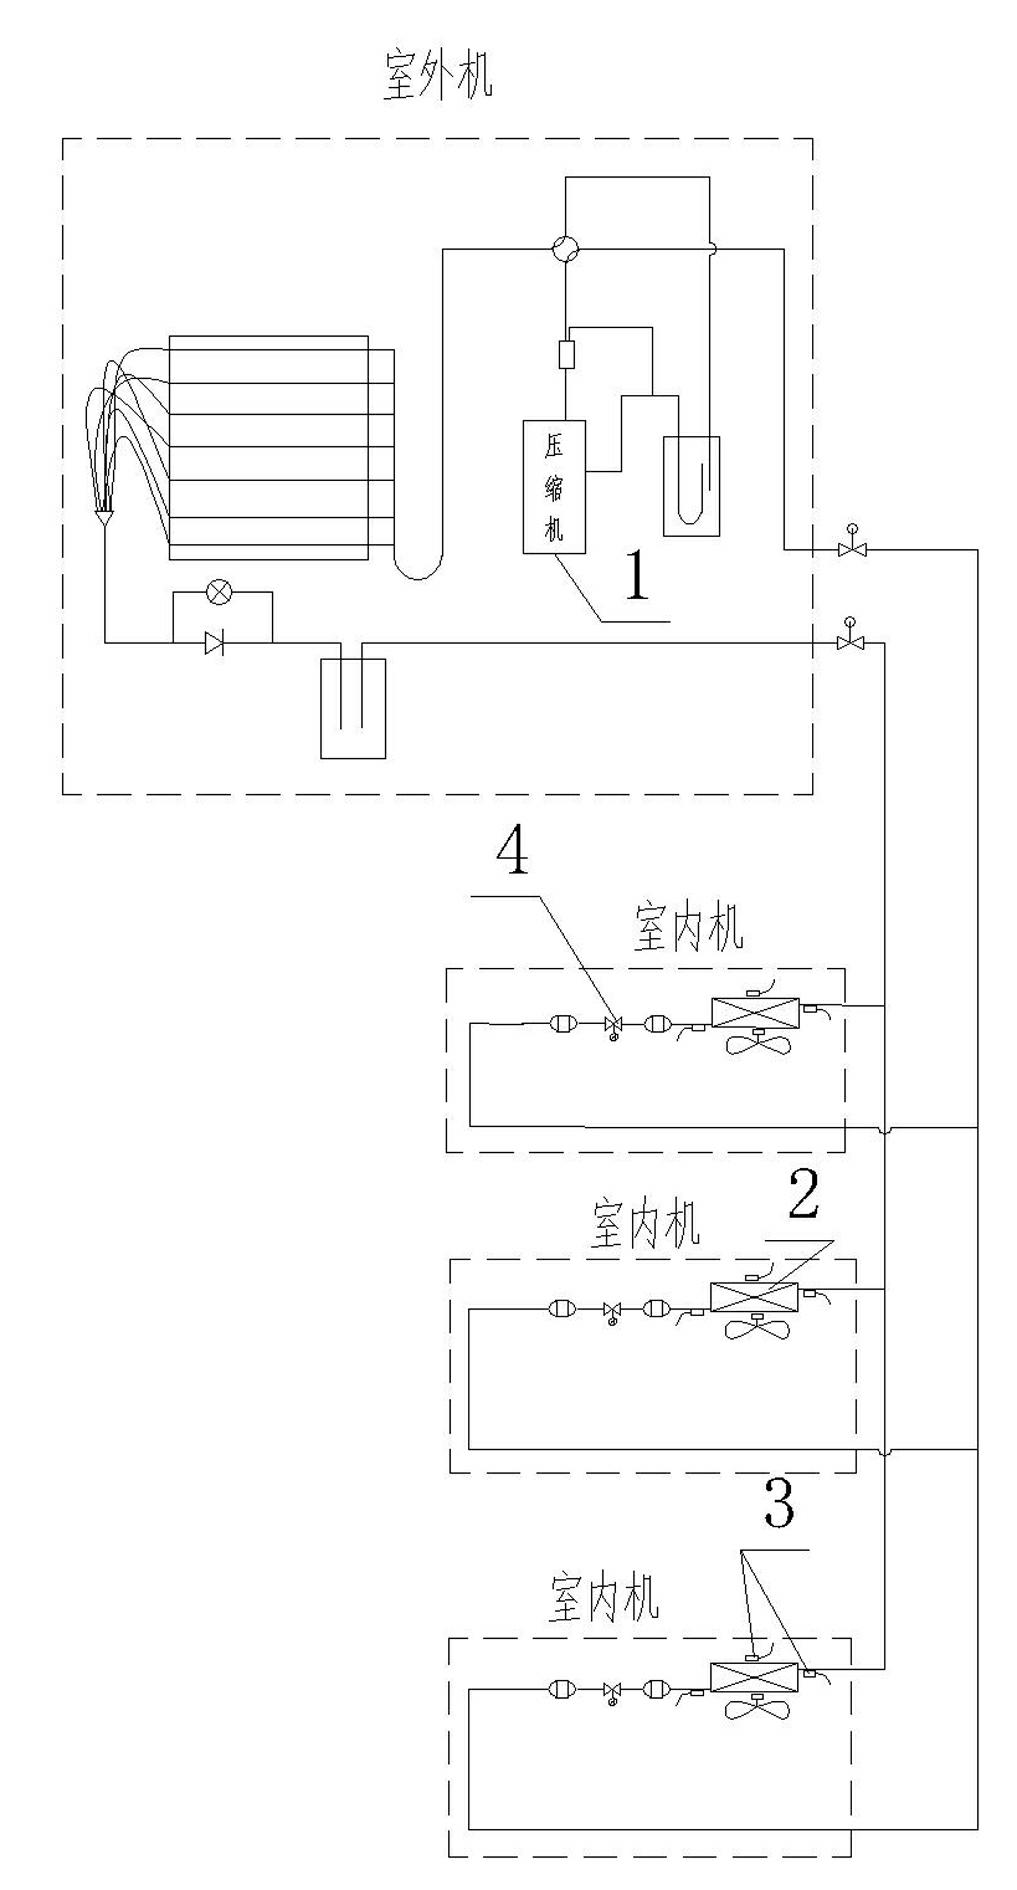 The Control Method of Preventing Refrigerant Drift Flow During Heating of Multi-connected Air Conditioning Units